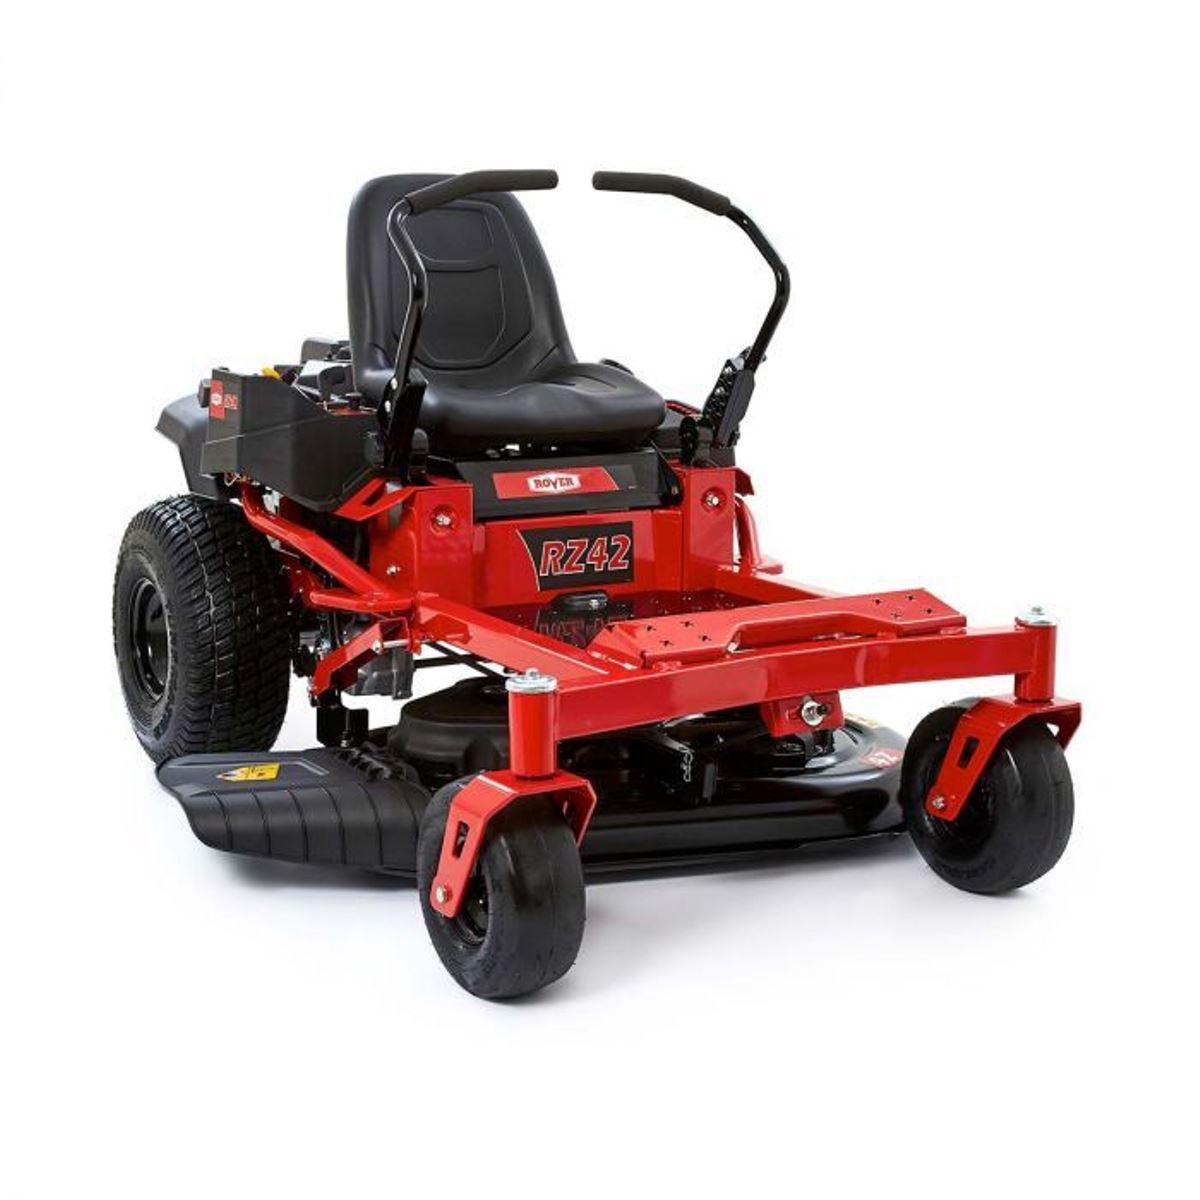 Rover RZ 42 Ride on lawn mower 